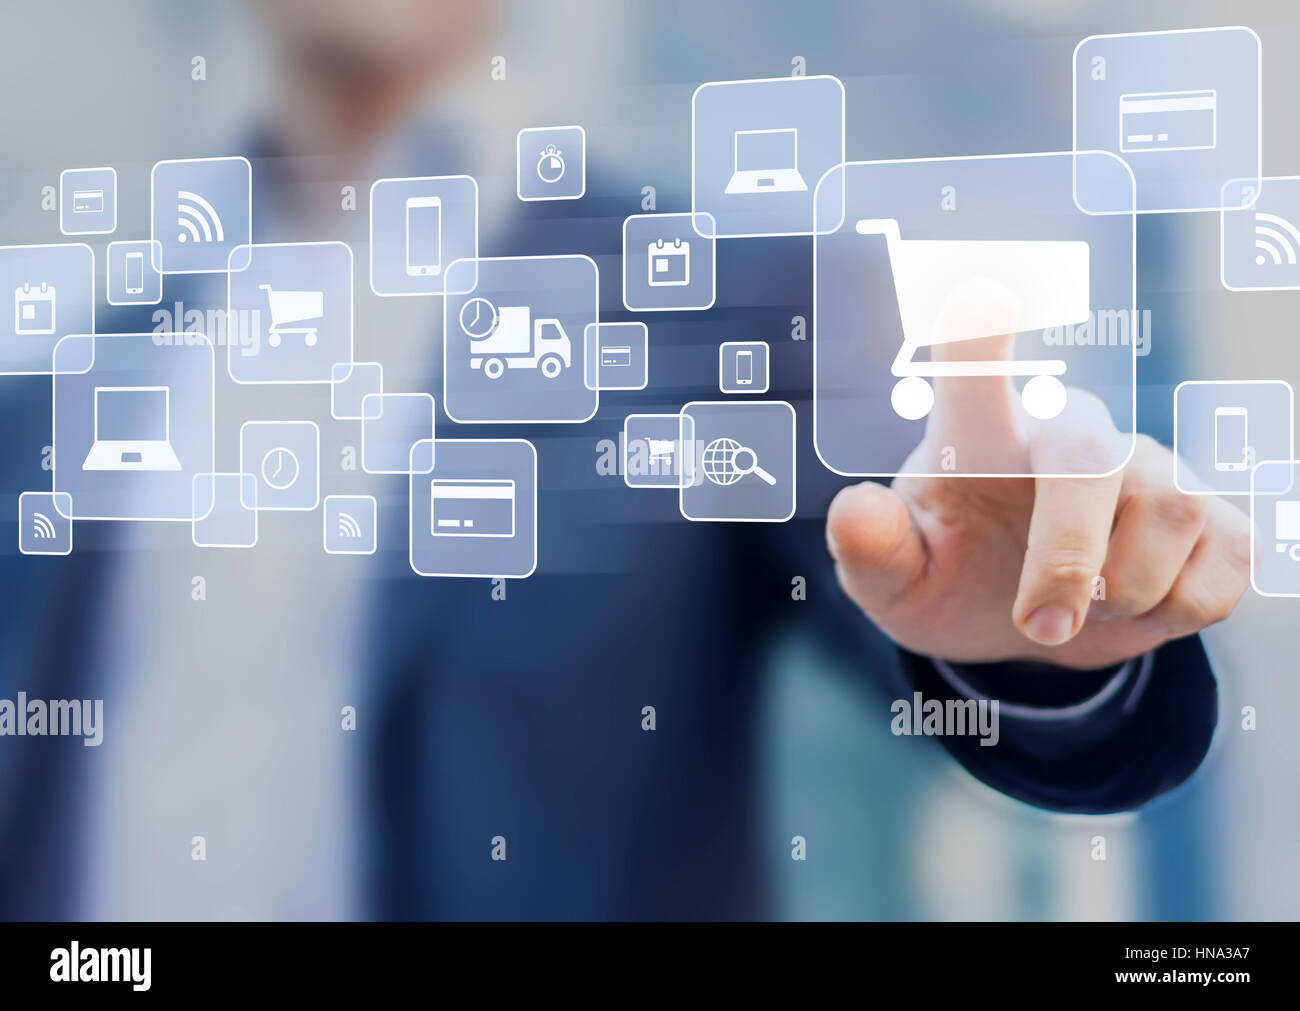 E-commerce concept with a person touching a button on a digital interface with icons of shopping cart, delivery truck and credit card, symbol online Stock Photo